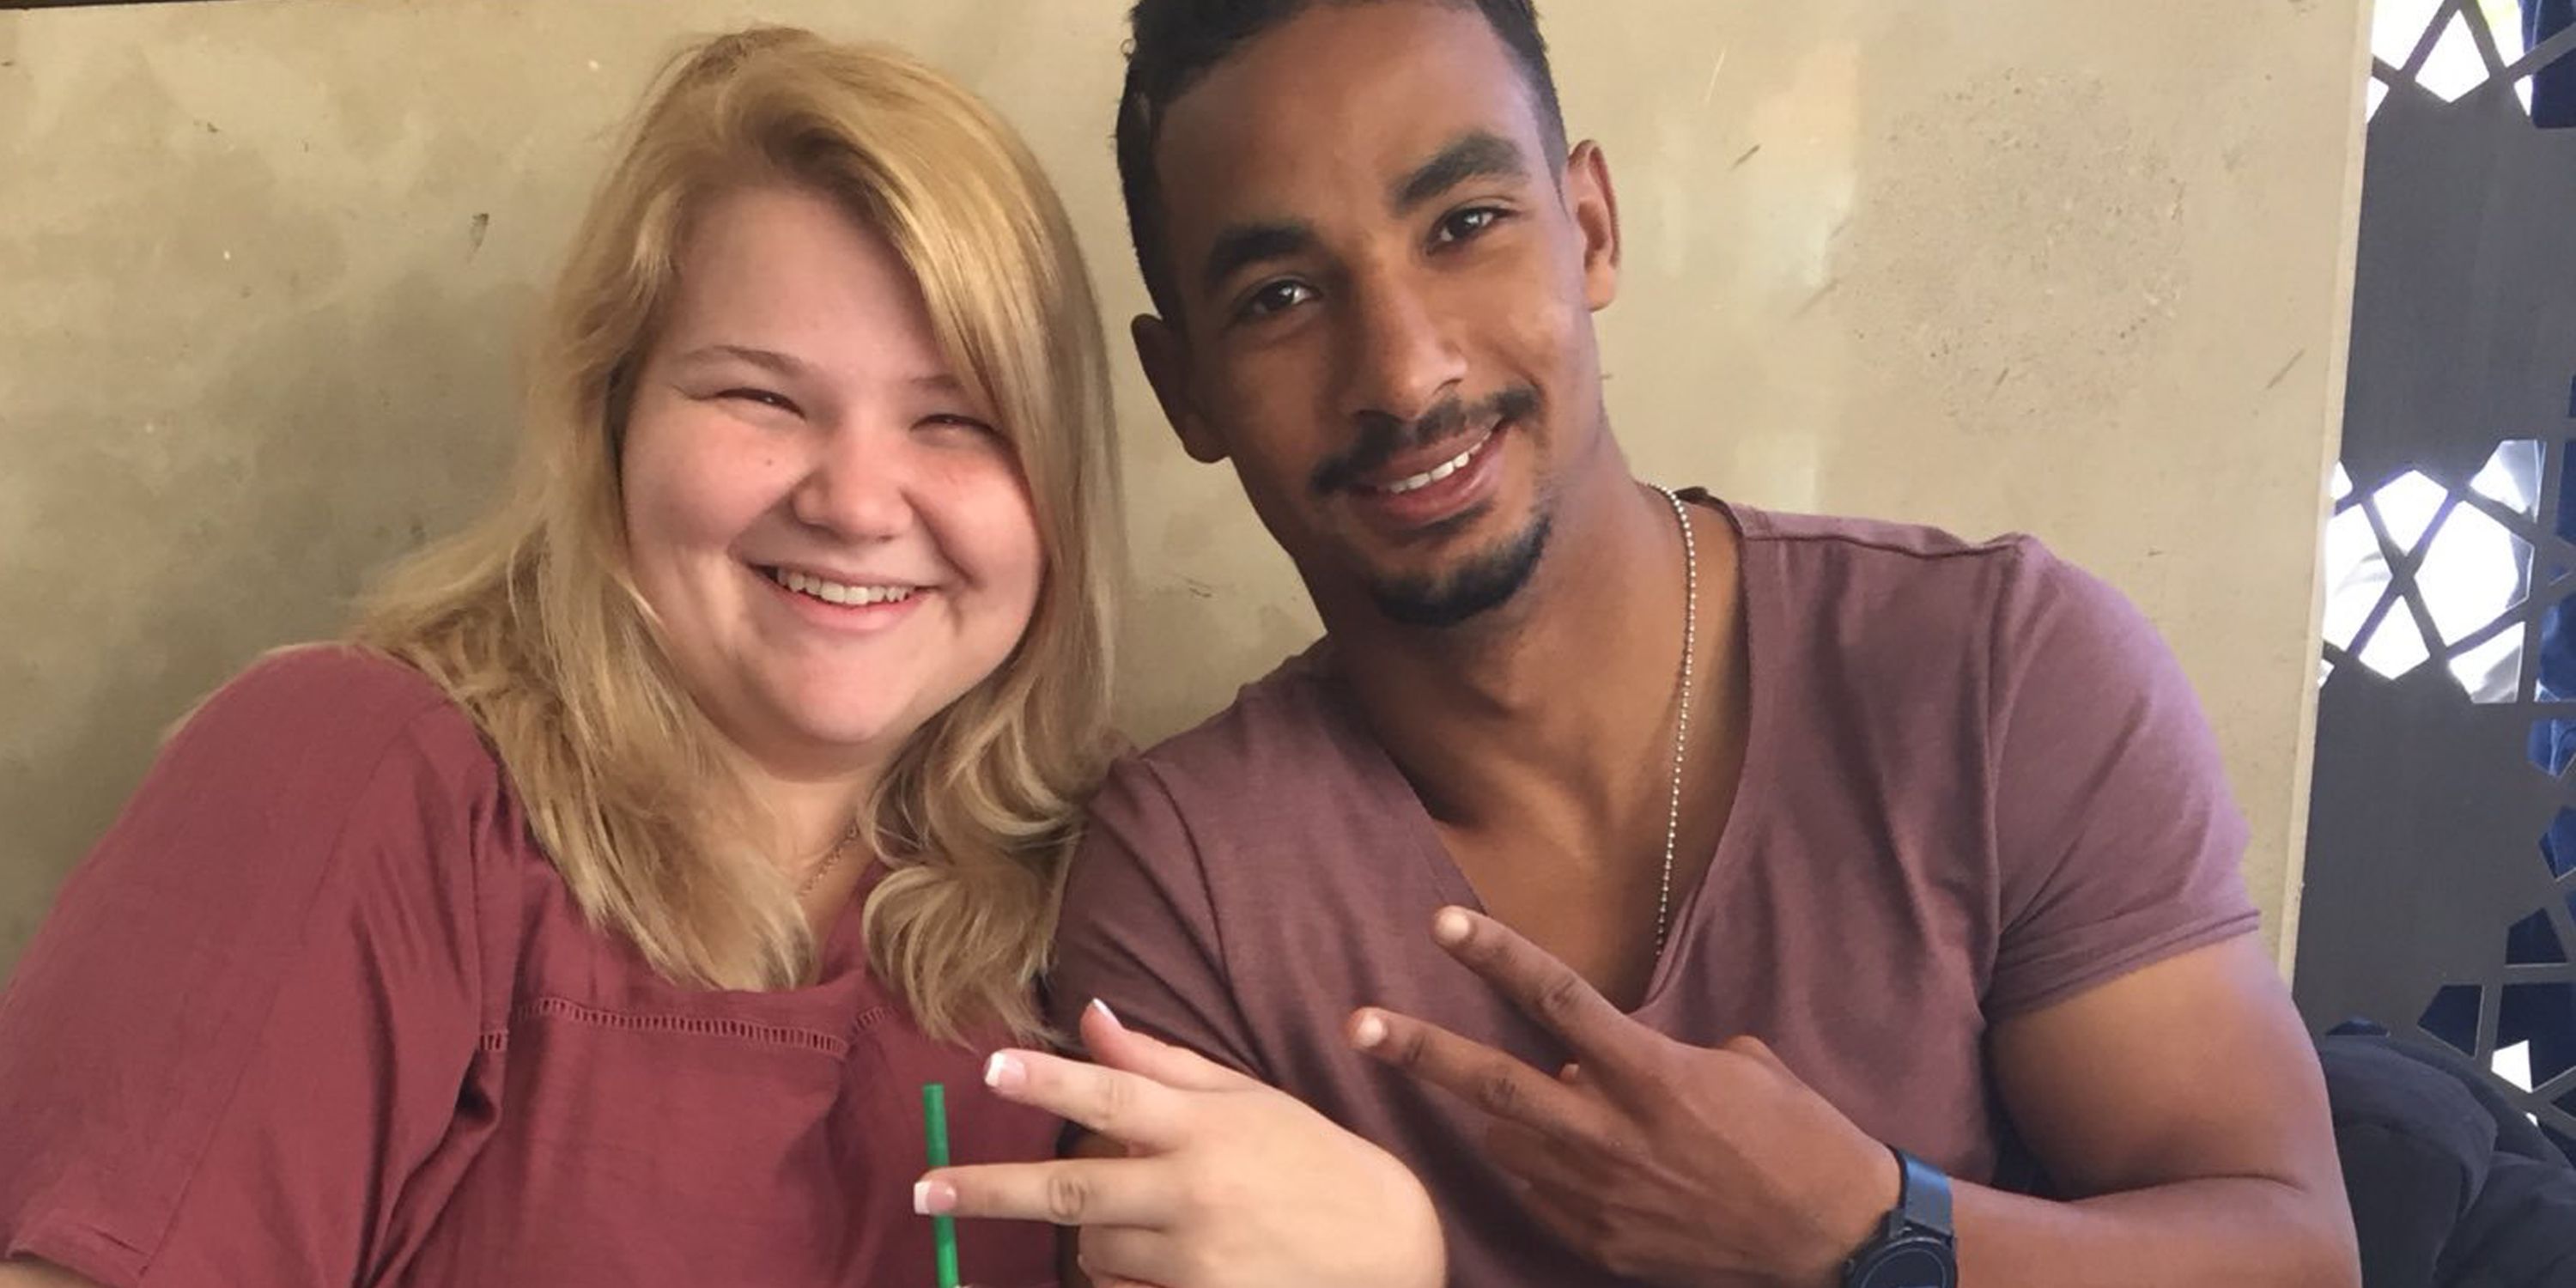 Nicole Nafziger with Azan Tefou both making peace signs on 90 Day Fiance